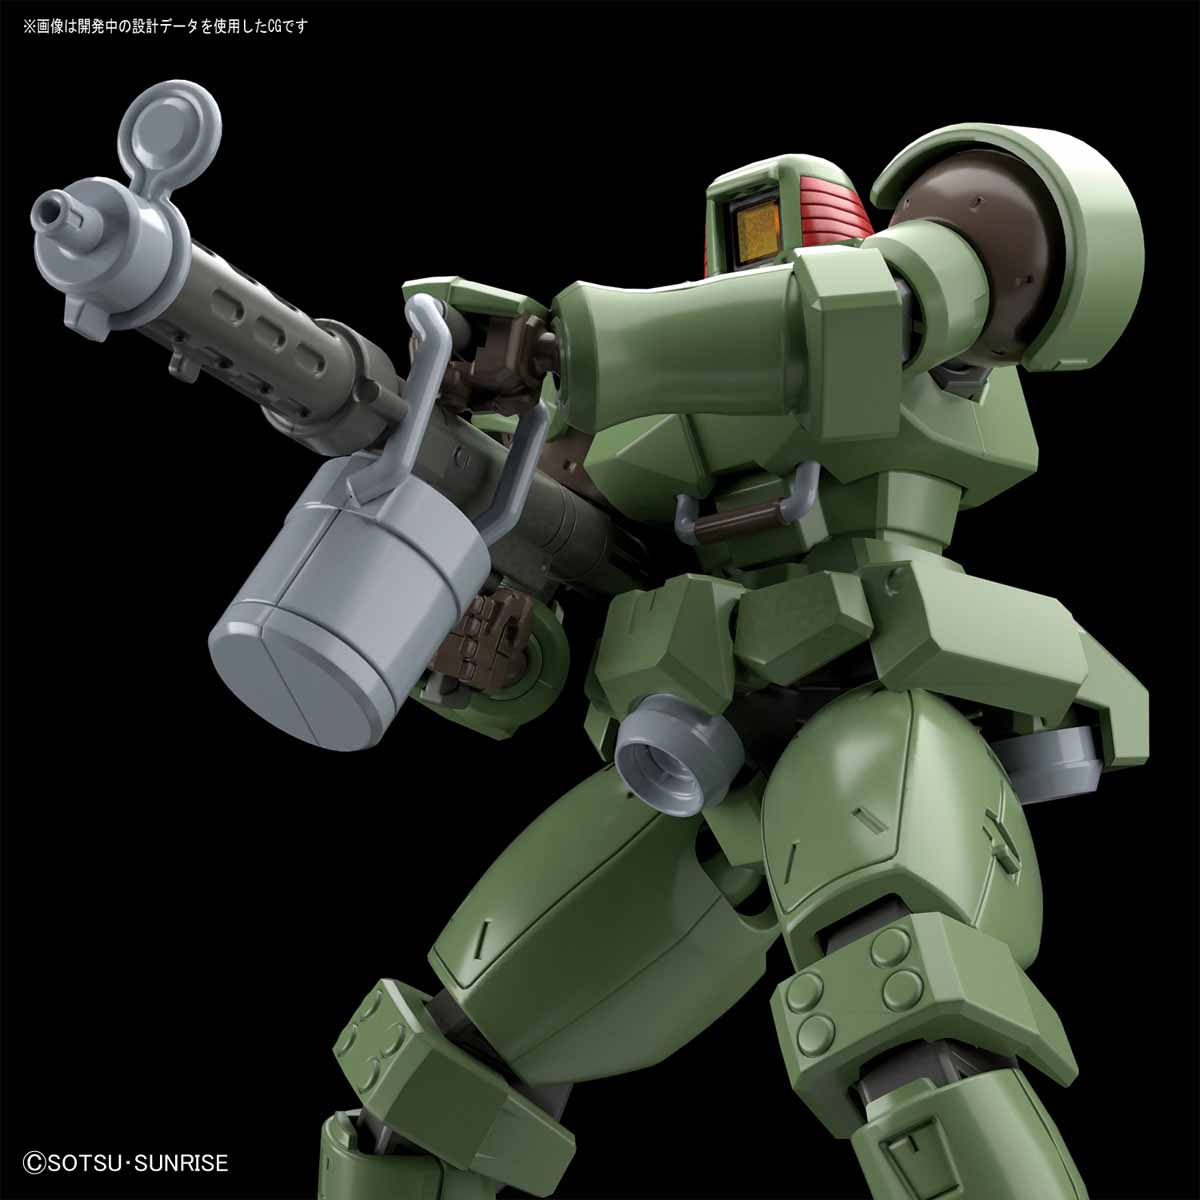 HGAC 1/144 OZ-06MS Leo - Release Info - Gundam Kits Collection News and Reviews